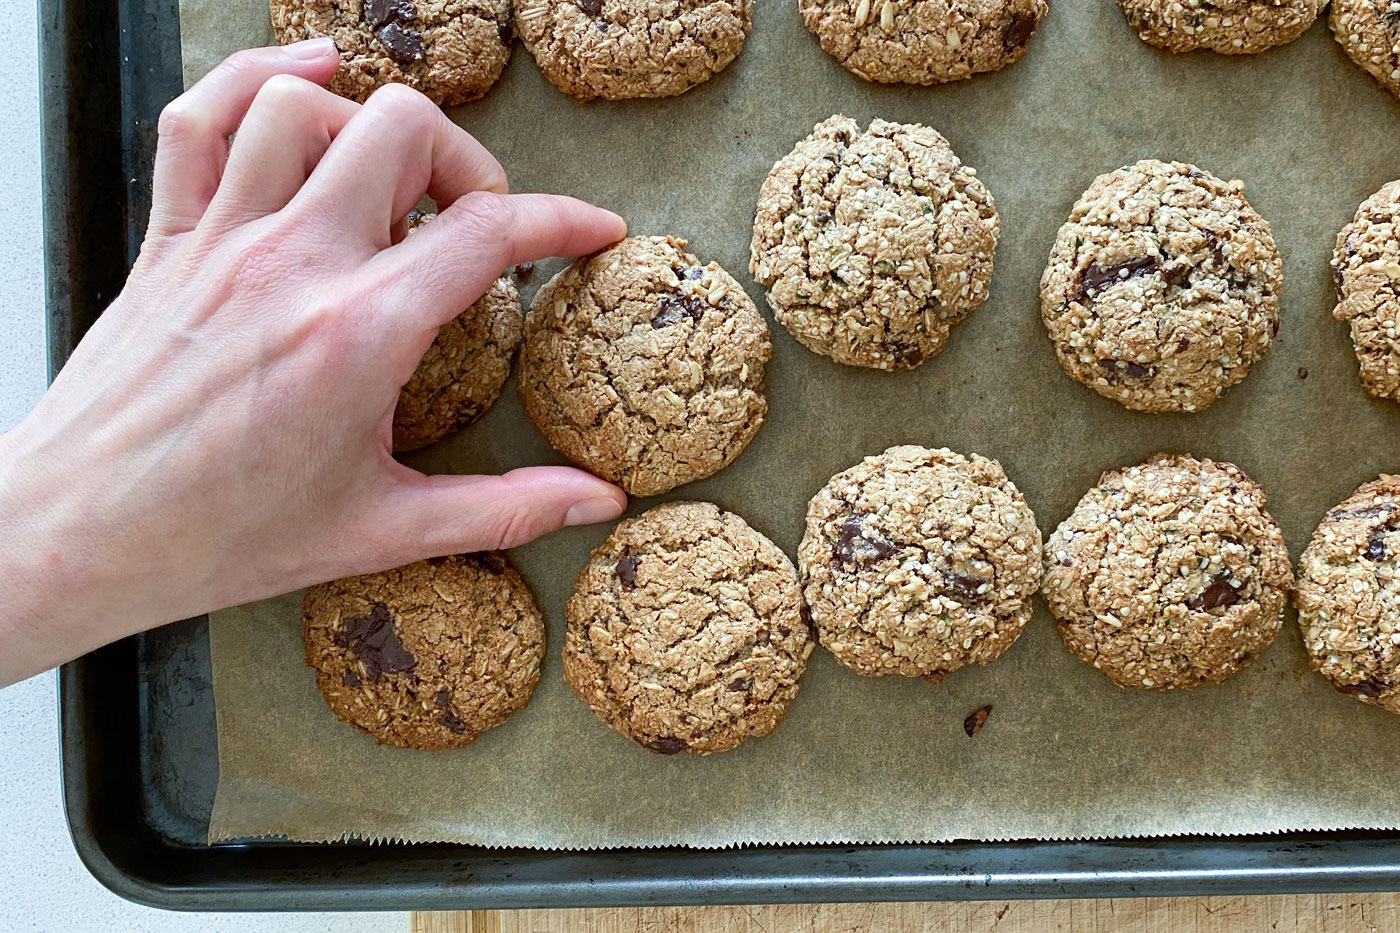 This is oatmeal chocolate chip cookies recipe made by Active Vegetarian